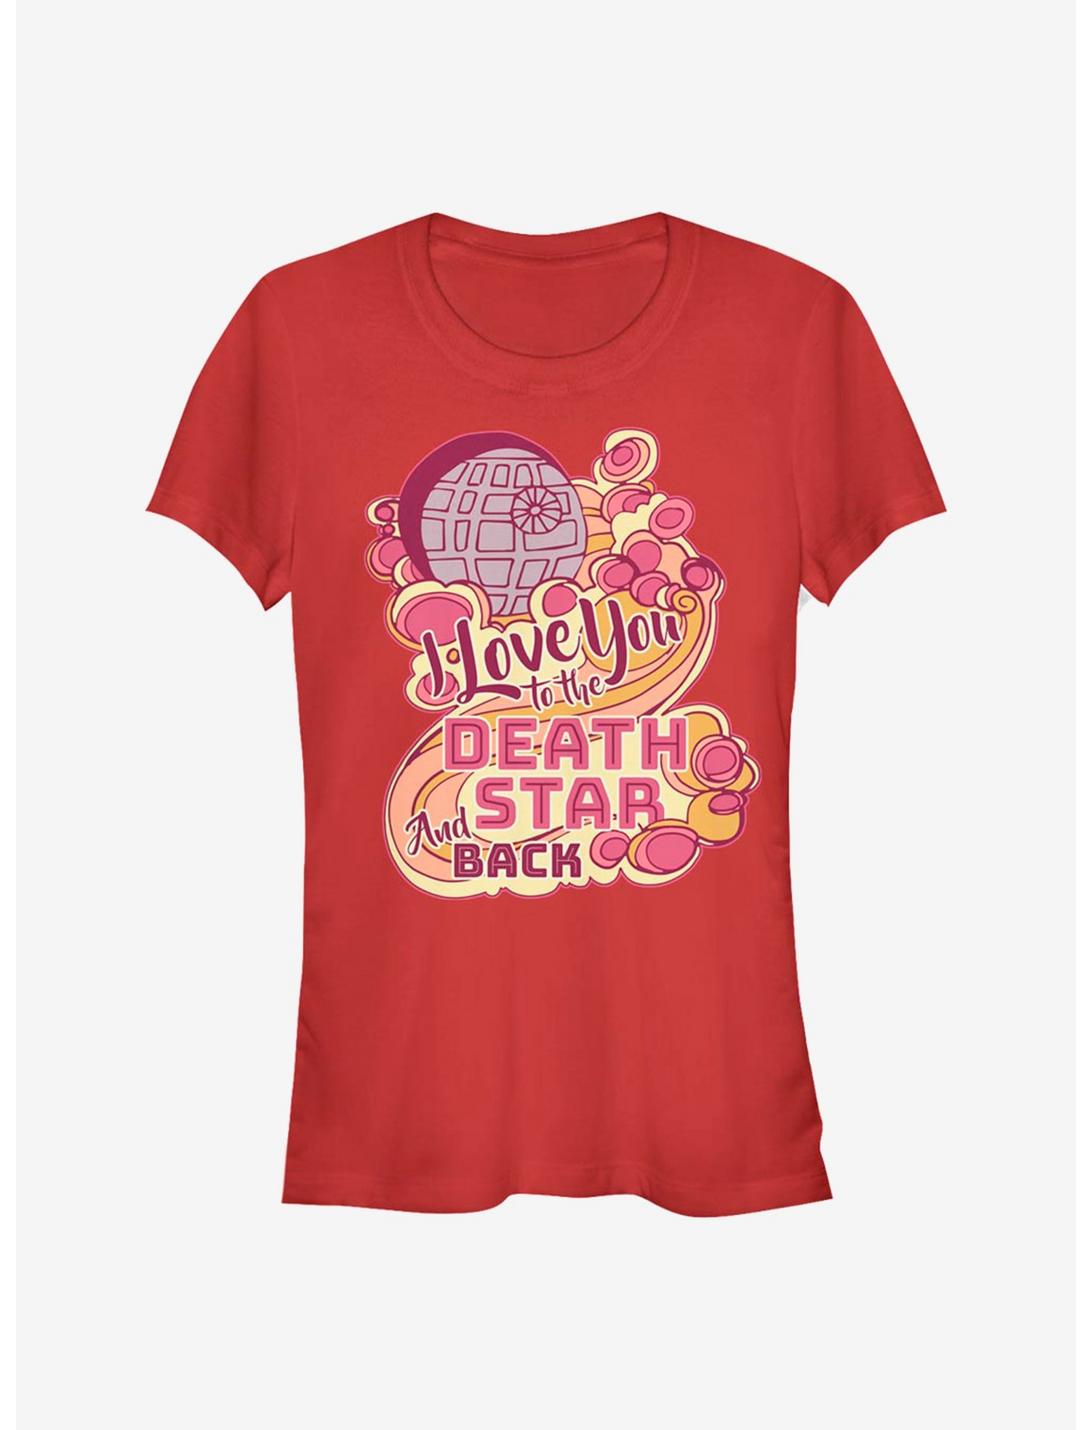 Star Wars Death Star And Back Girls T-Shirt, RED, hi-res